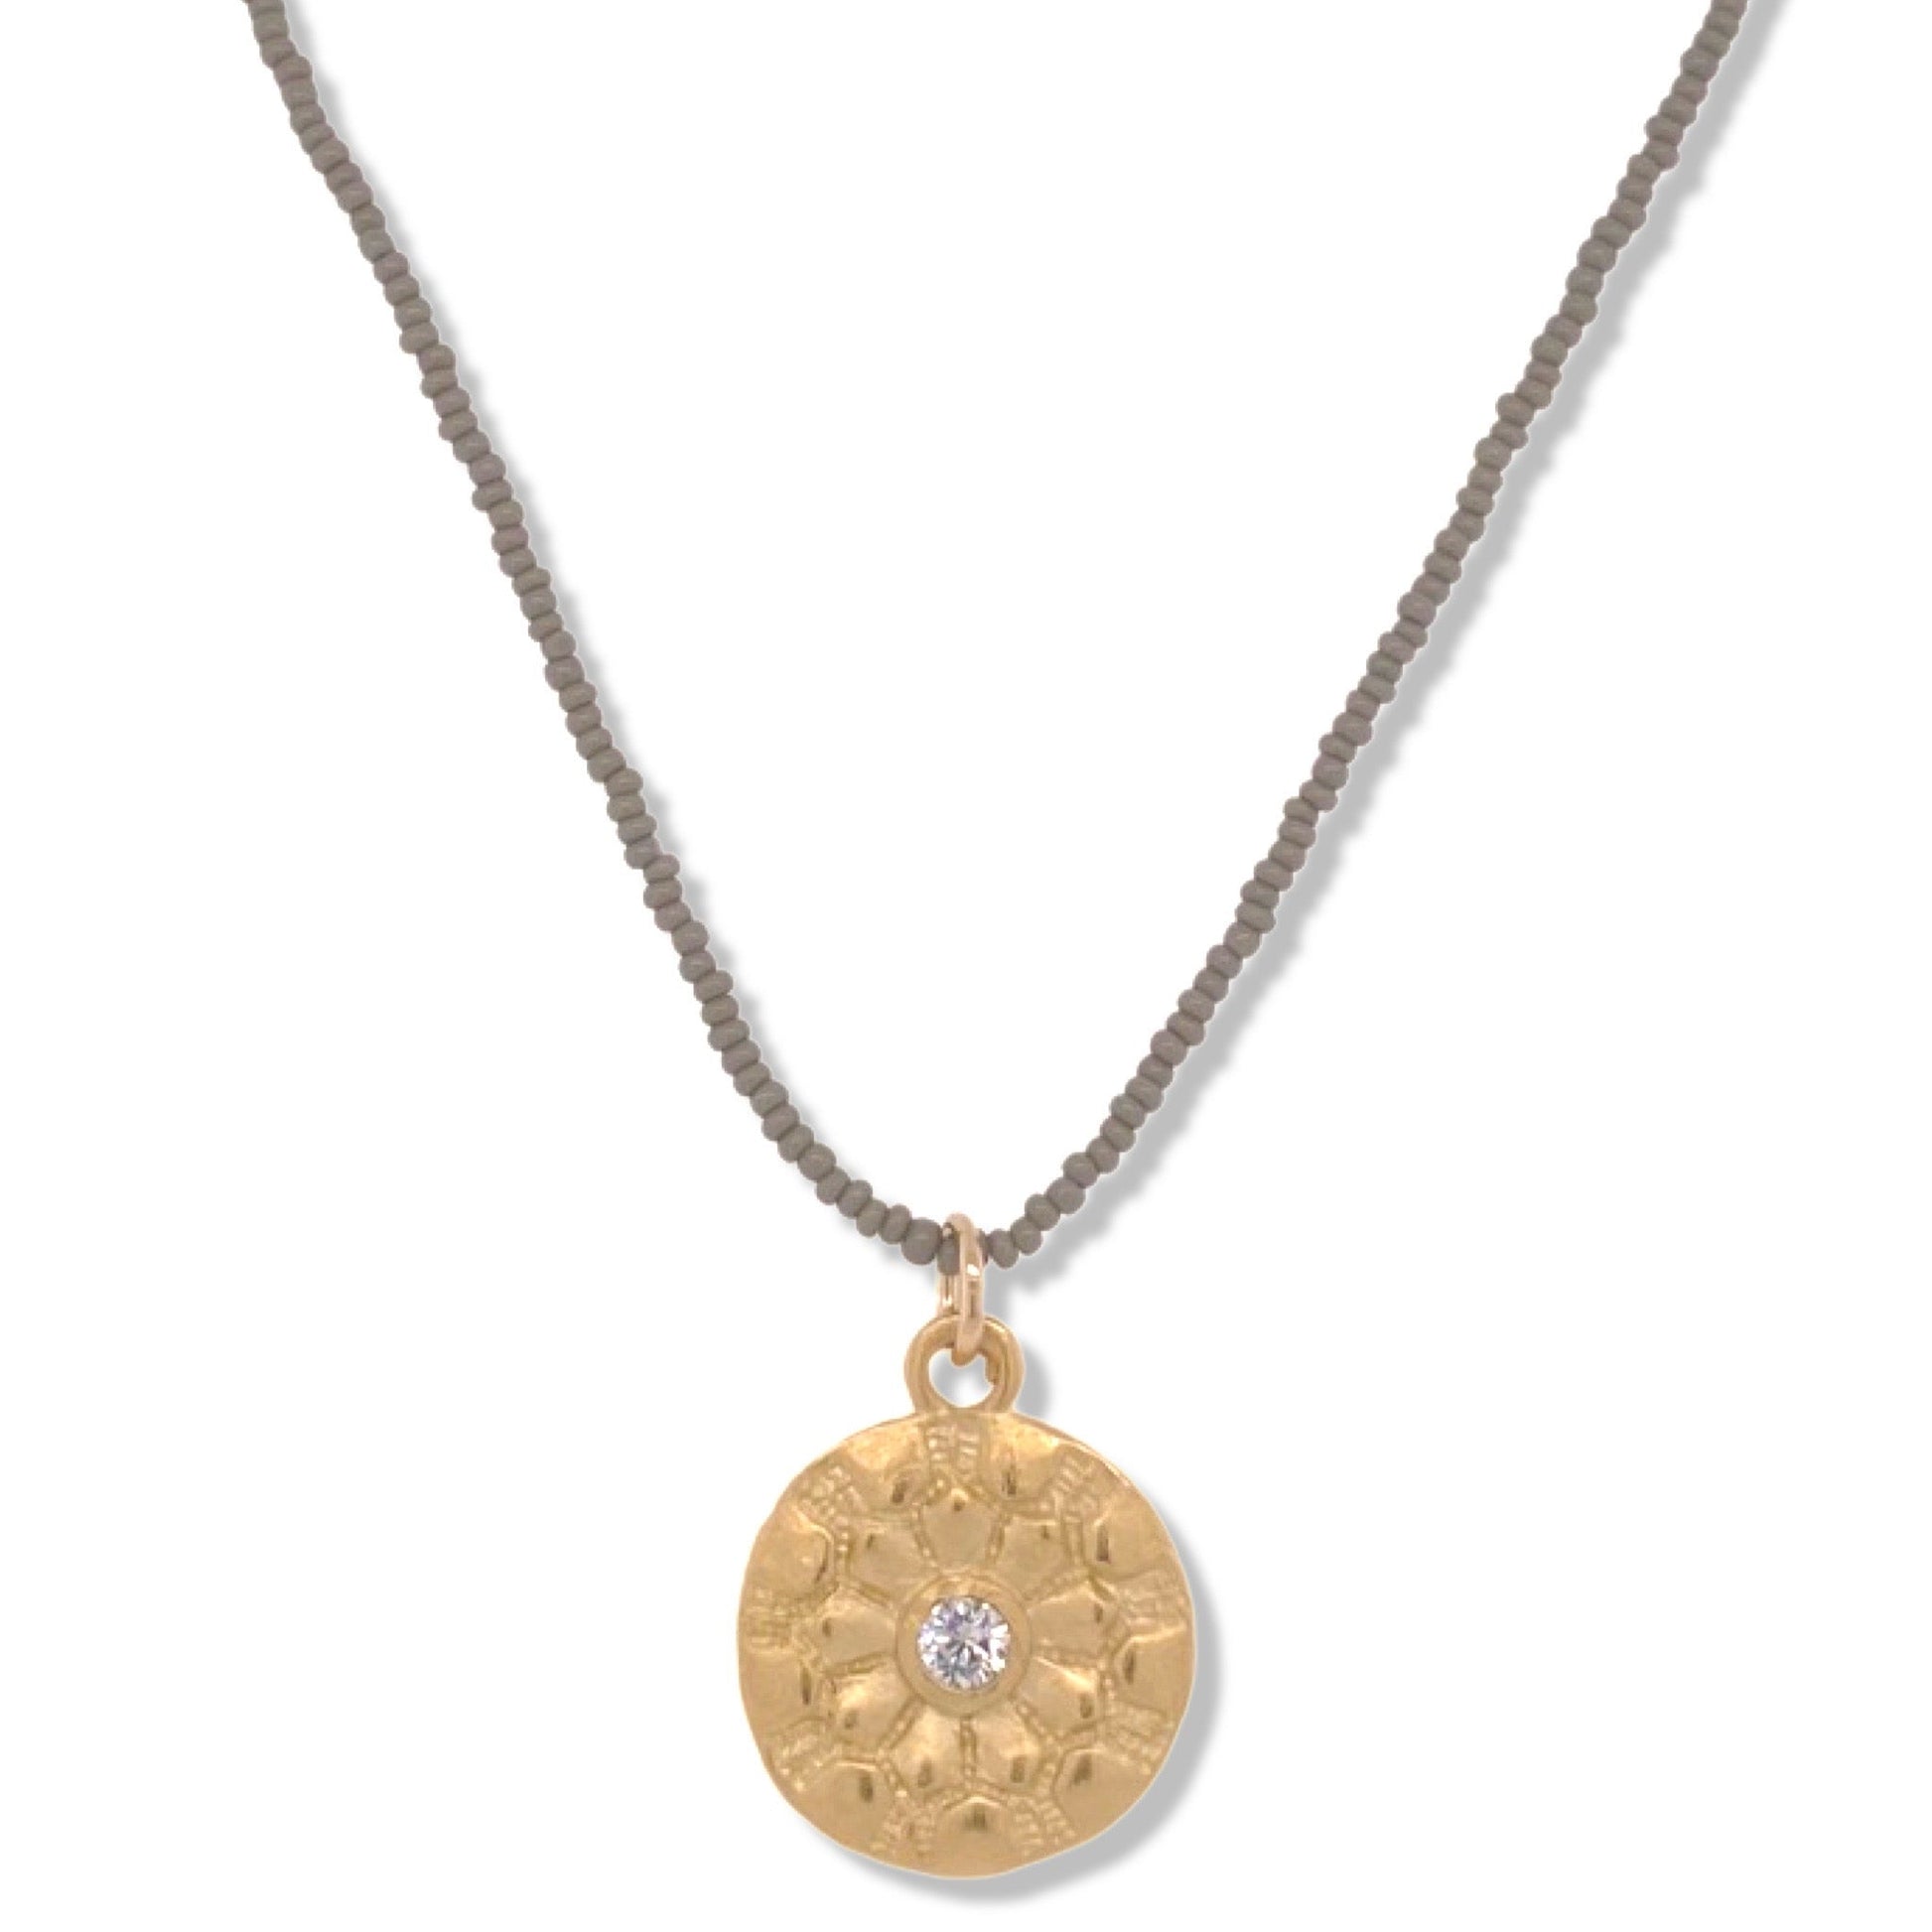 Mara Necklace in Gold on Charcoal Micro Beads | Nalu | Nantucket